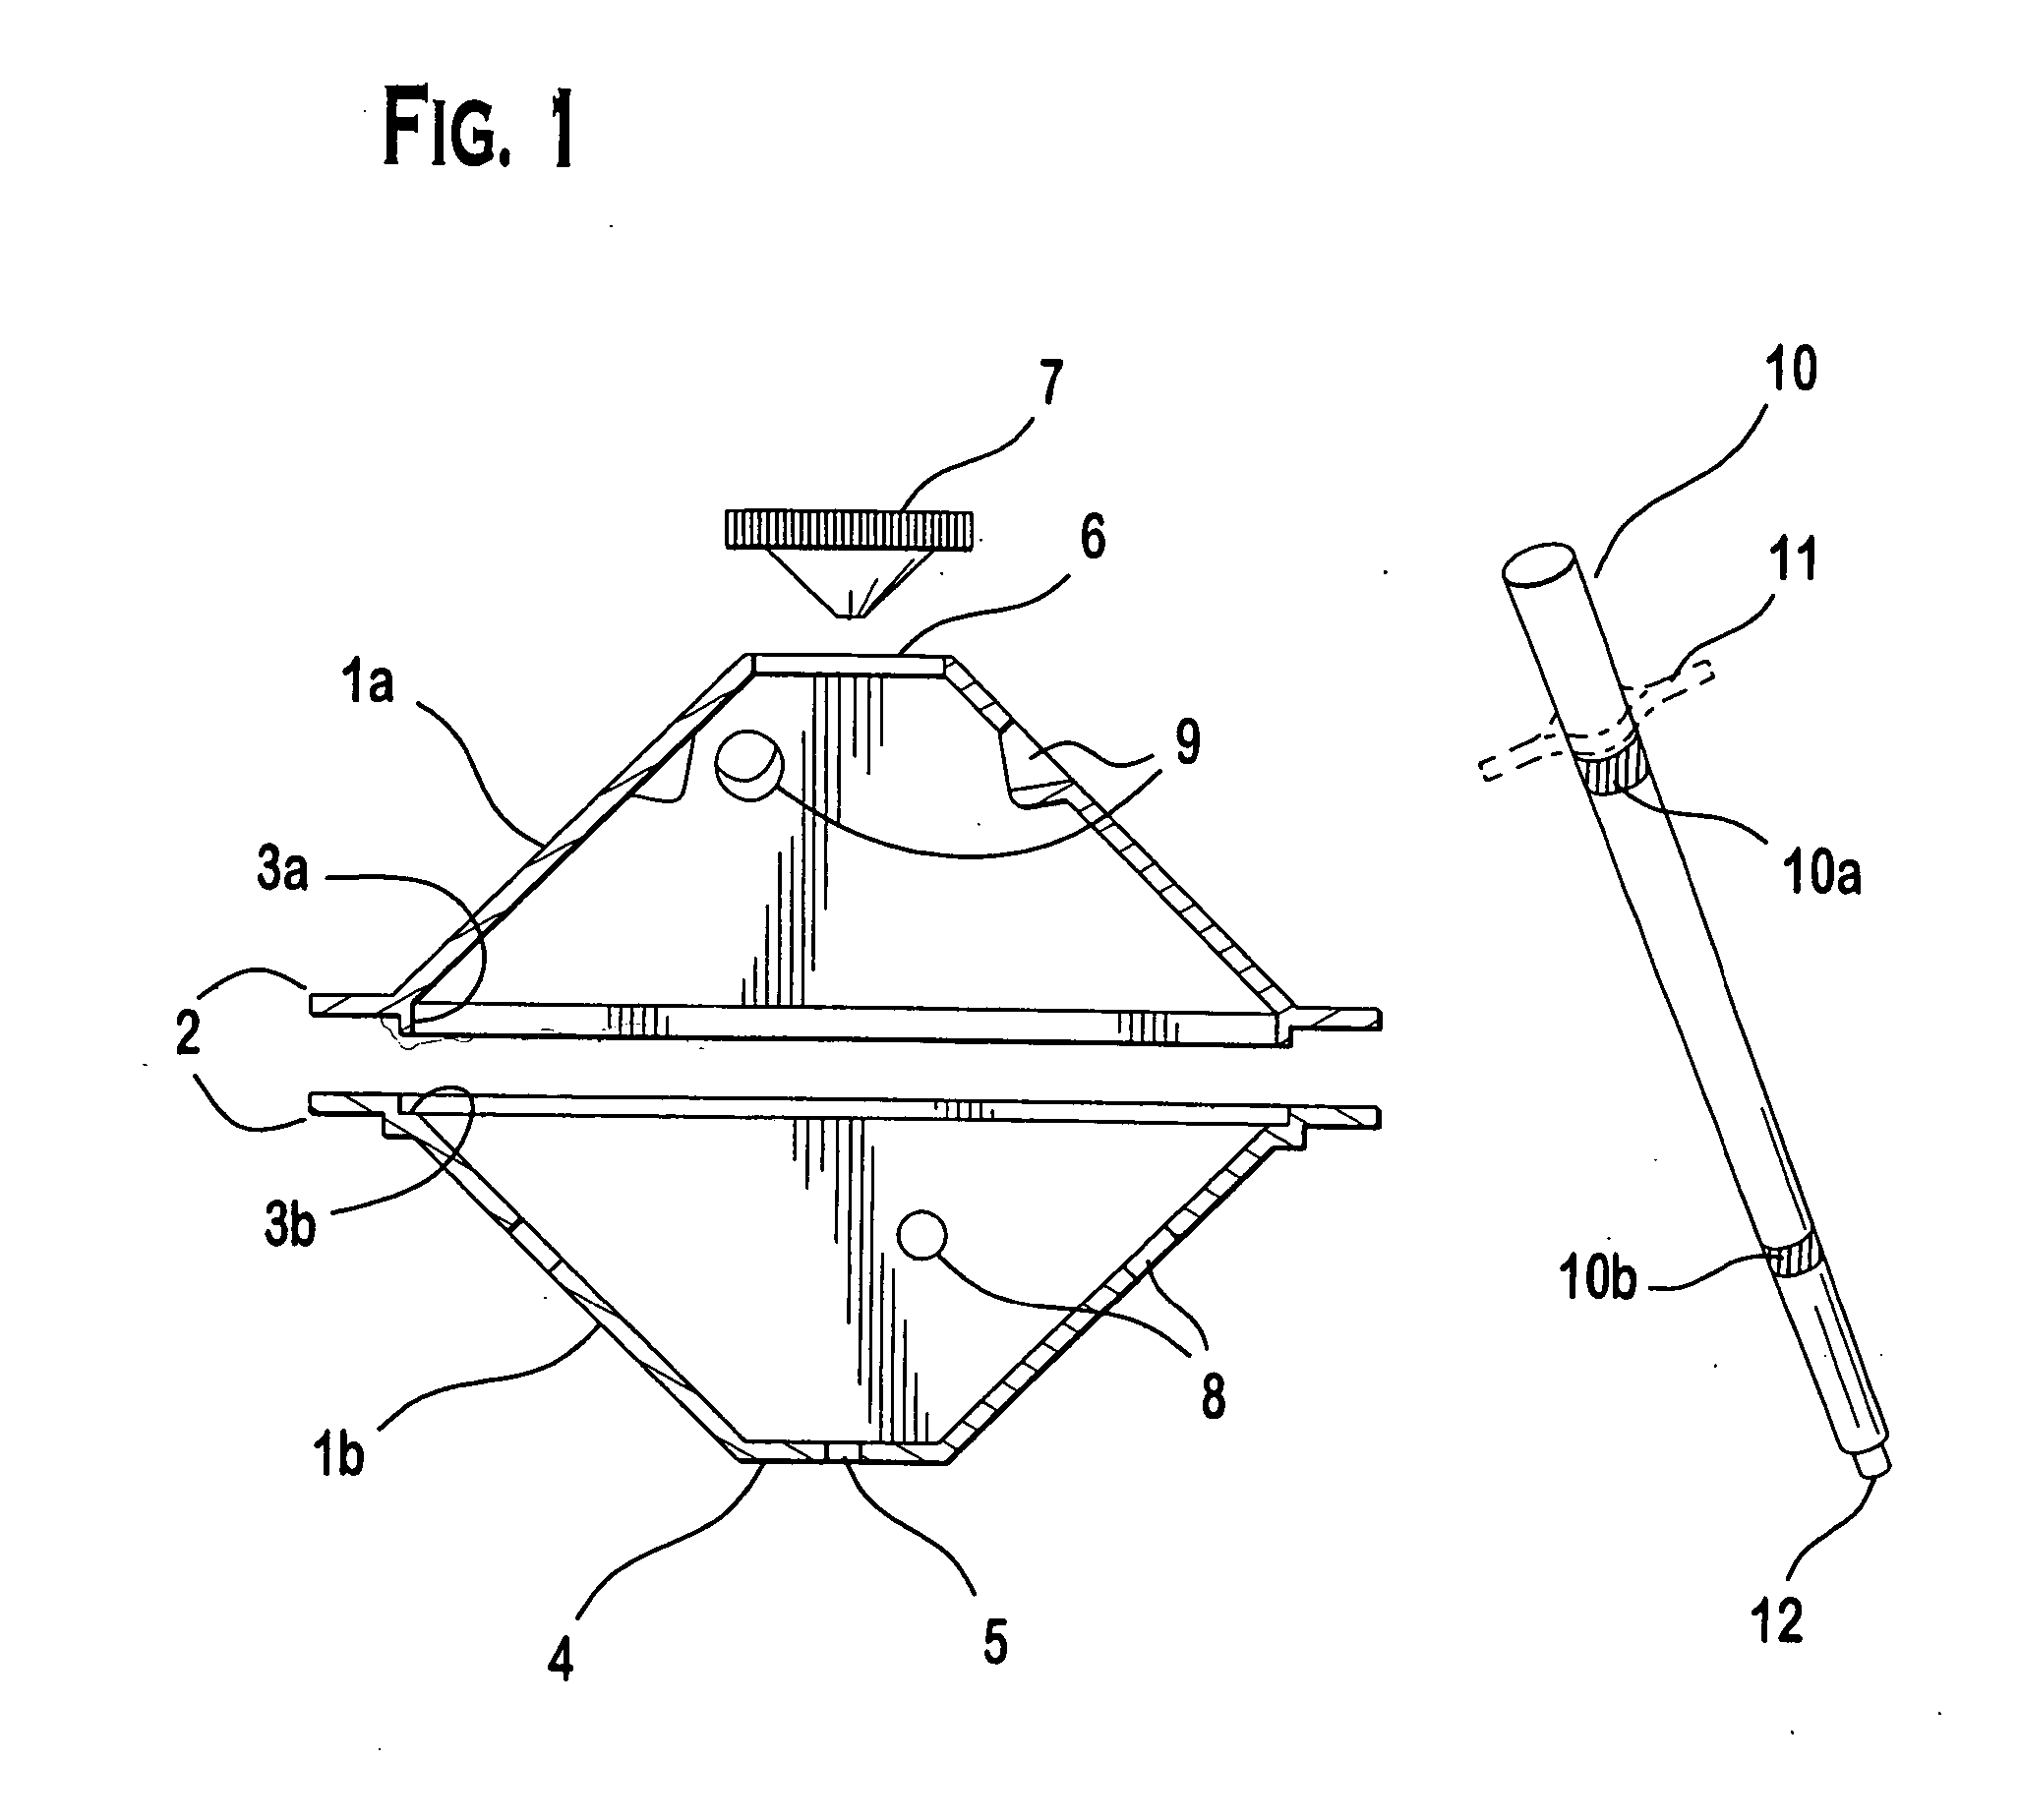 Novel surface structures and methods thereof